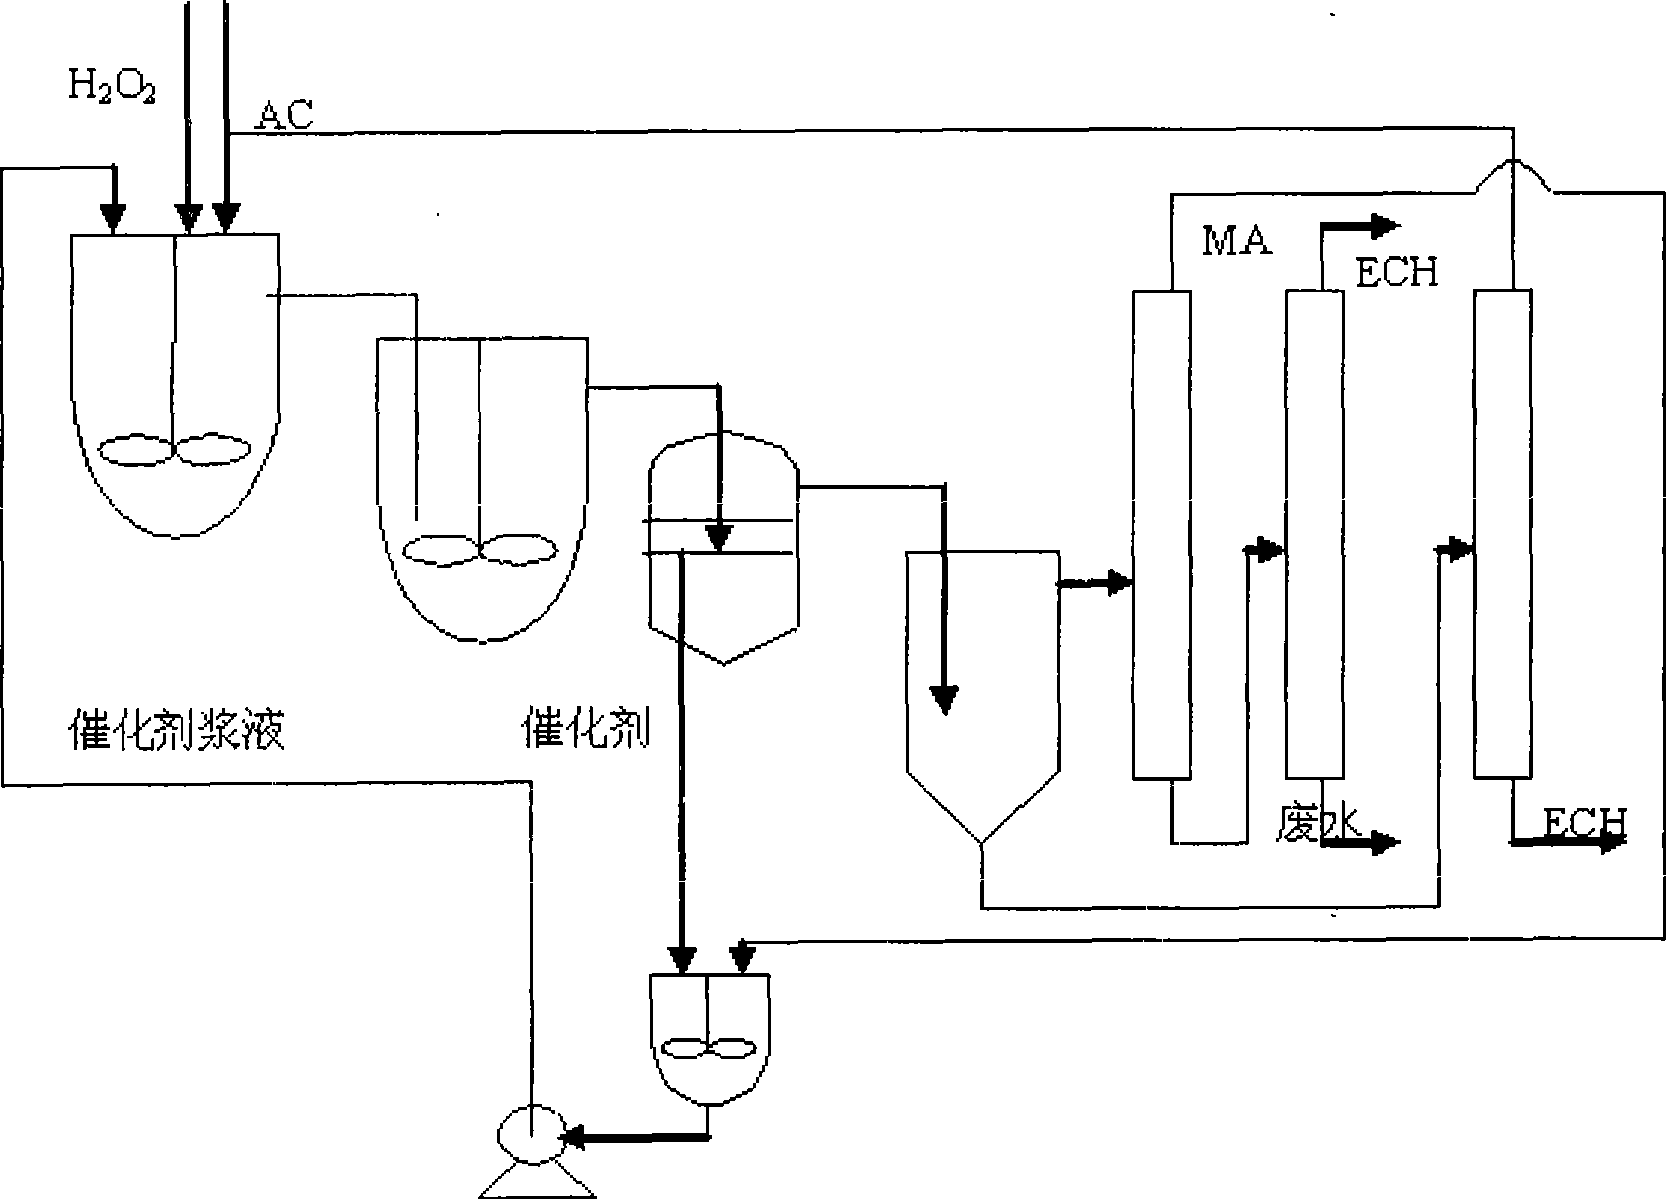 Continuous production method of epoxy chloropropane by hydrogen peroxide process